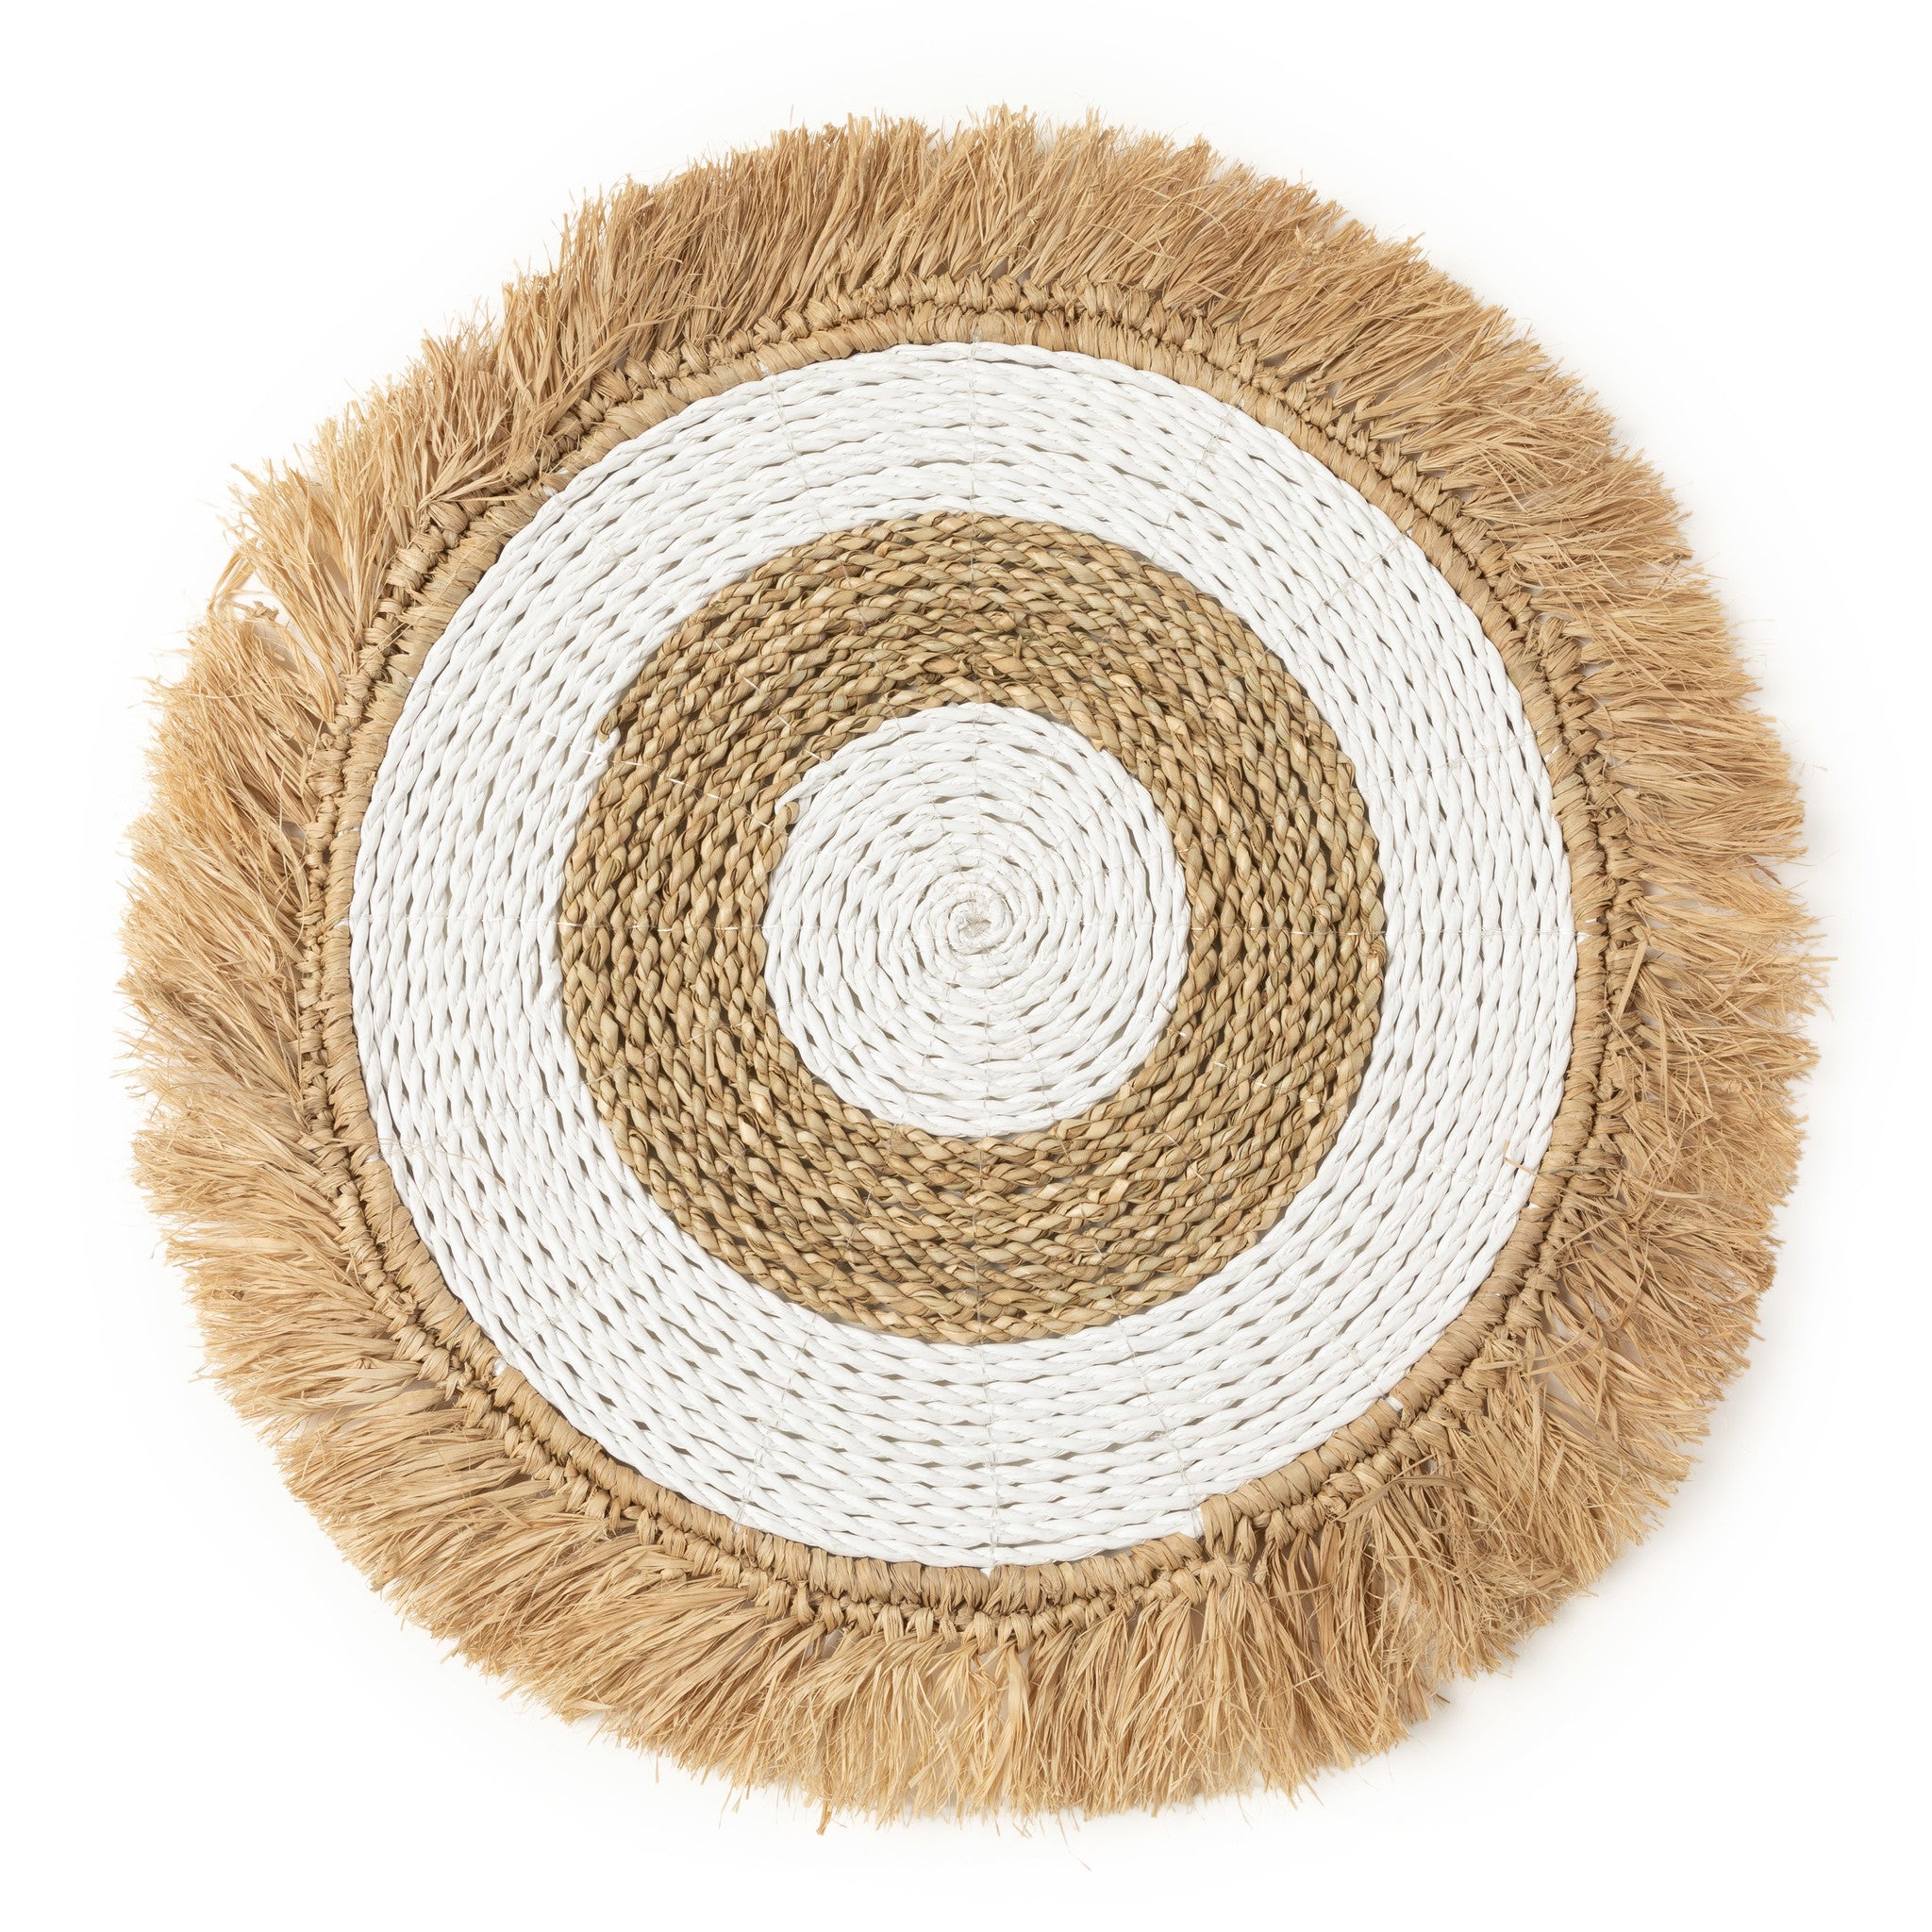 THE SEAGRASS RAFFIA Placemat Natural-White front view